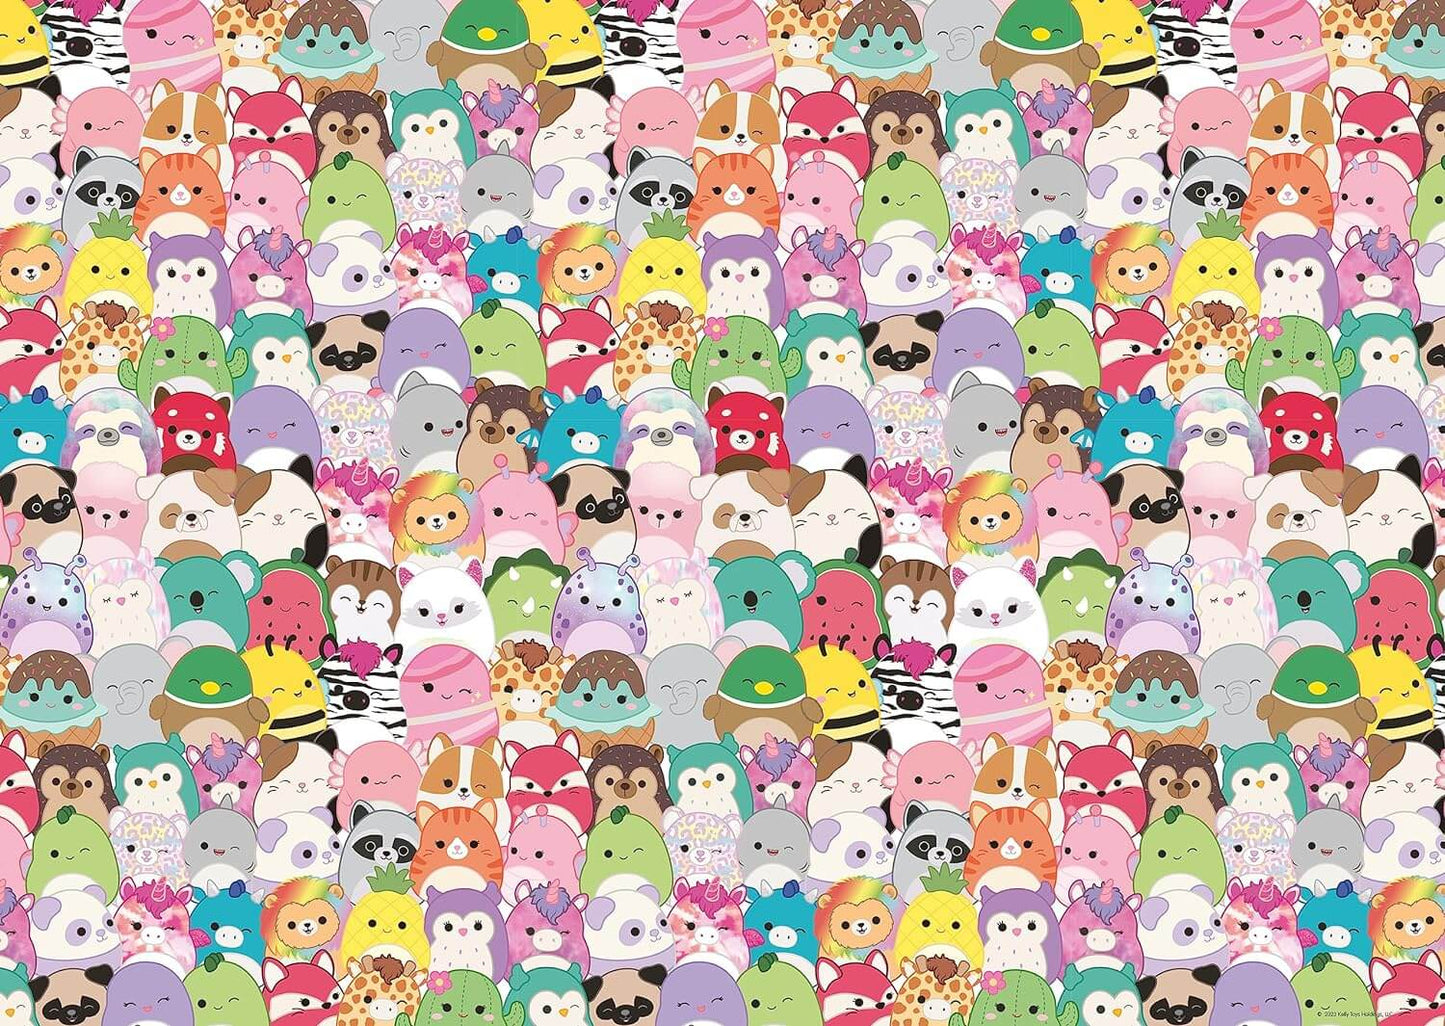 Jigsaw Puzzle Squishmallows - 1000 Pieces Puzzle